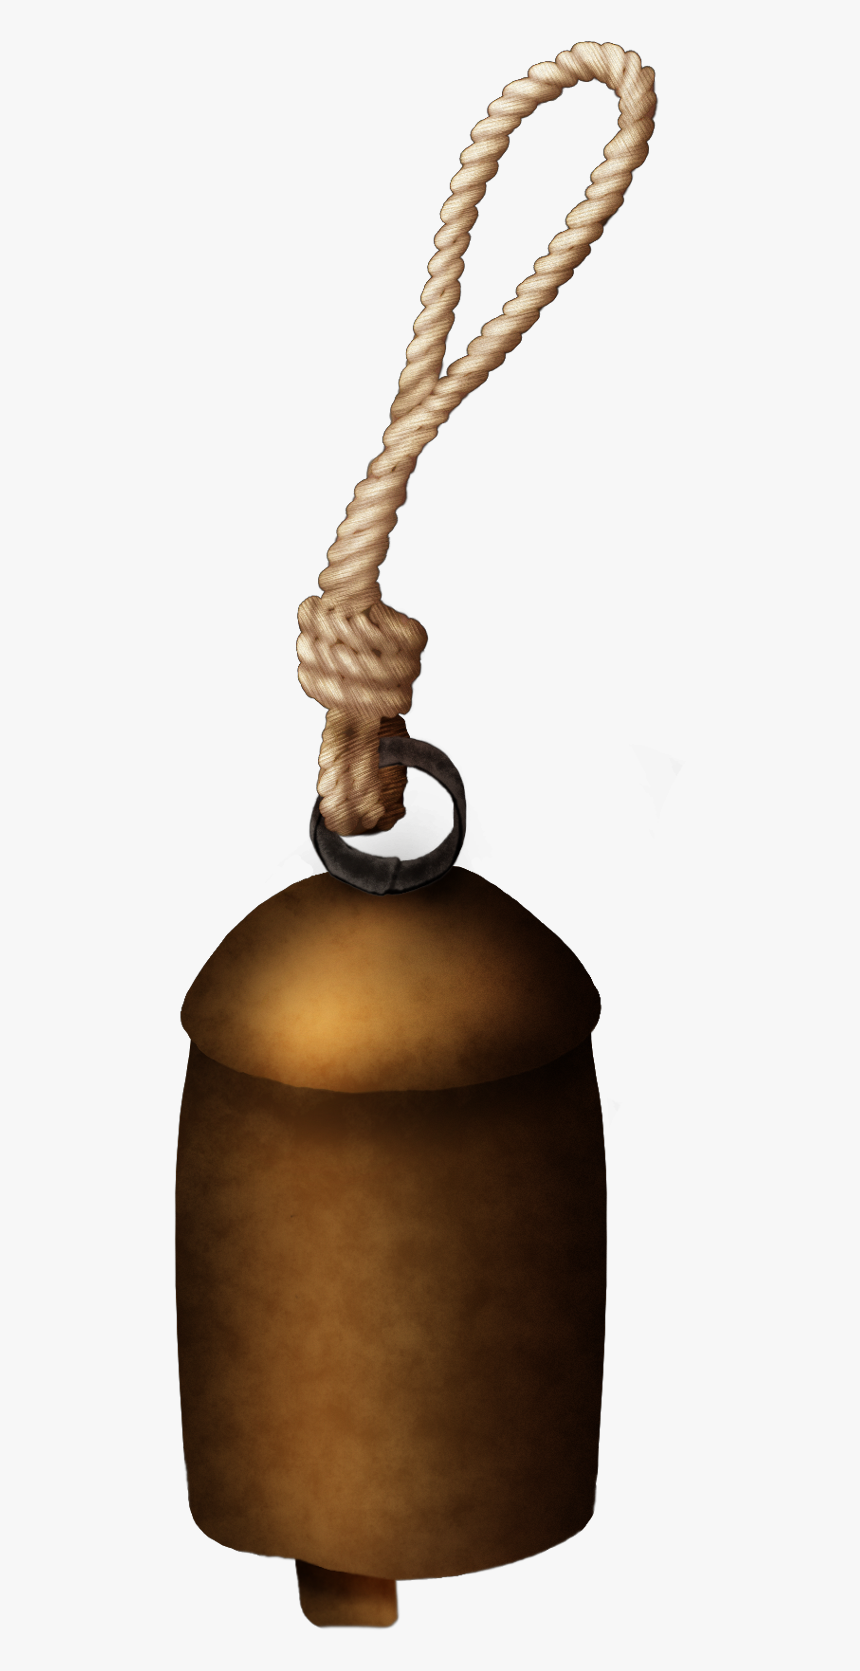 #bell #copper #cowbell #old #rope @picsart #mydrawing - Bomb, HD Png Download, Free Download